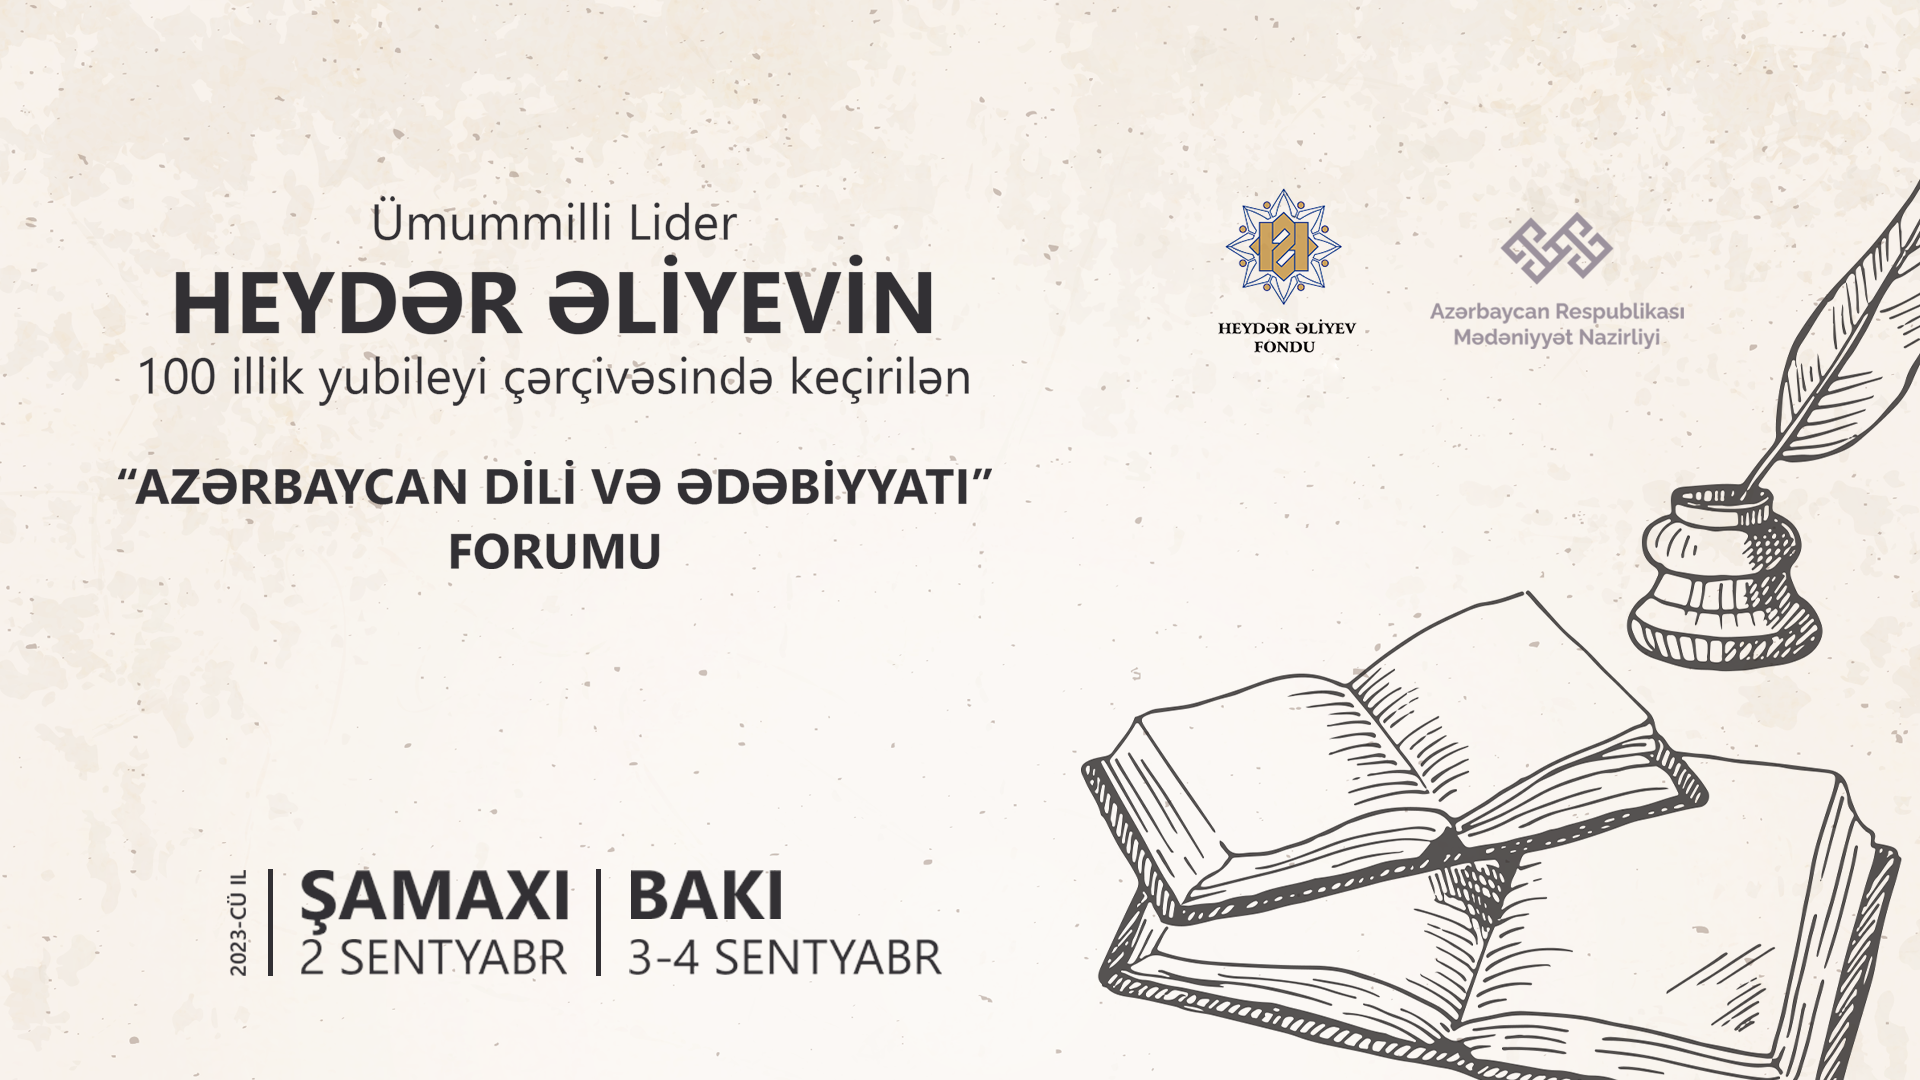 Forum of Azerbaijani Language and Literature to be held for first time